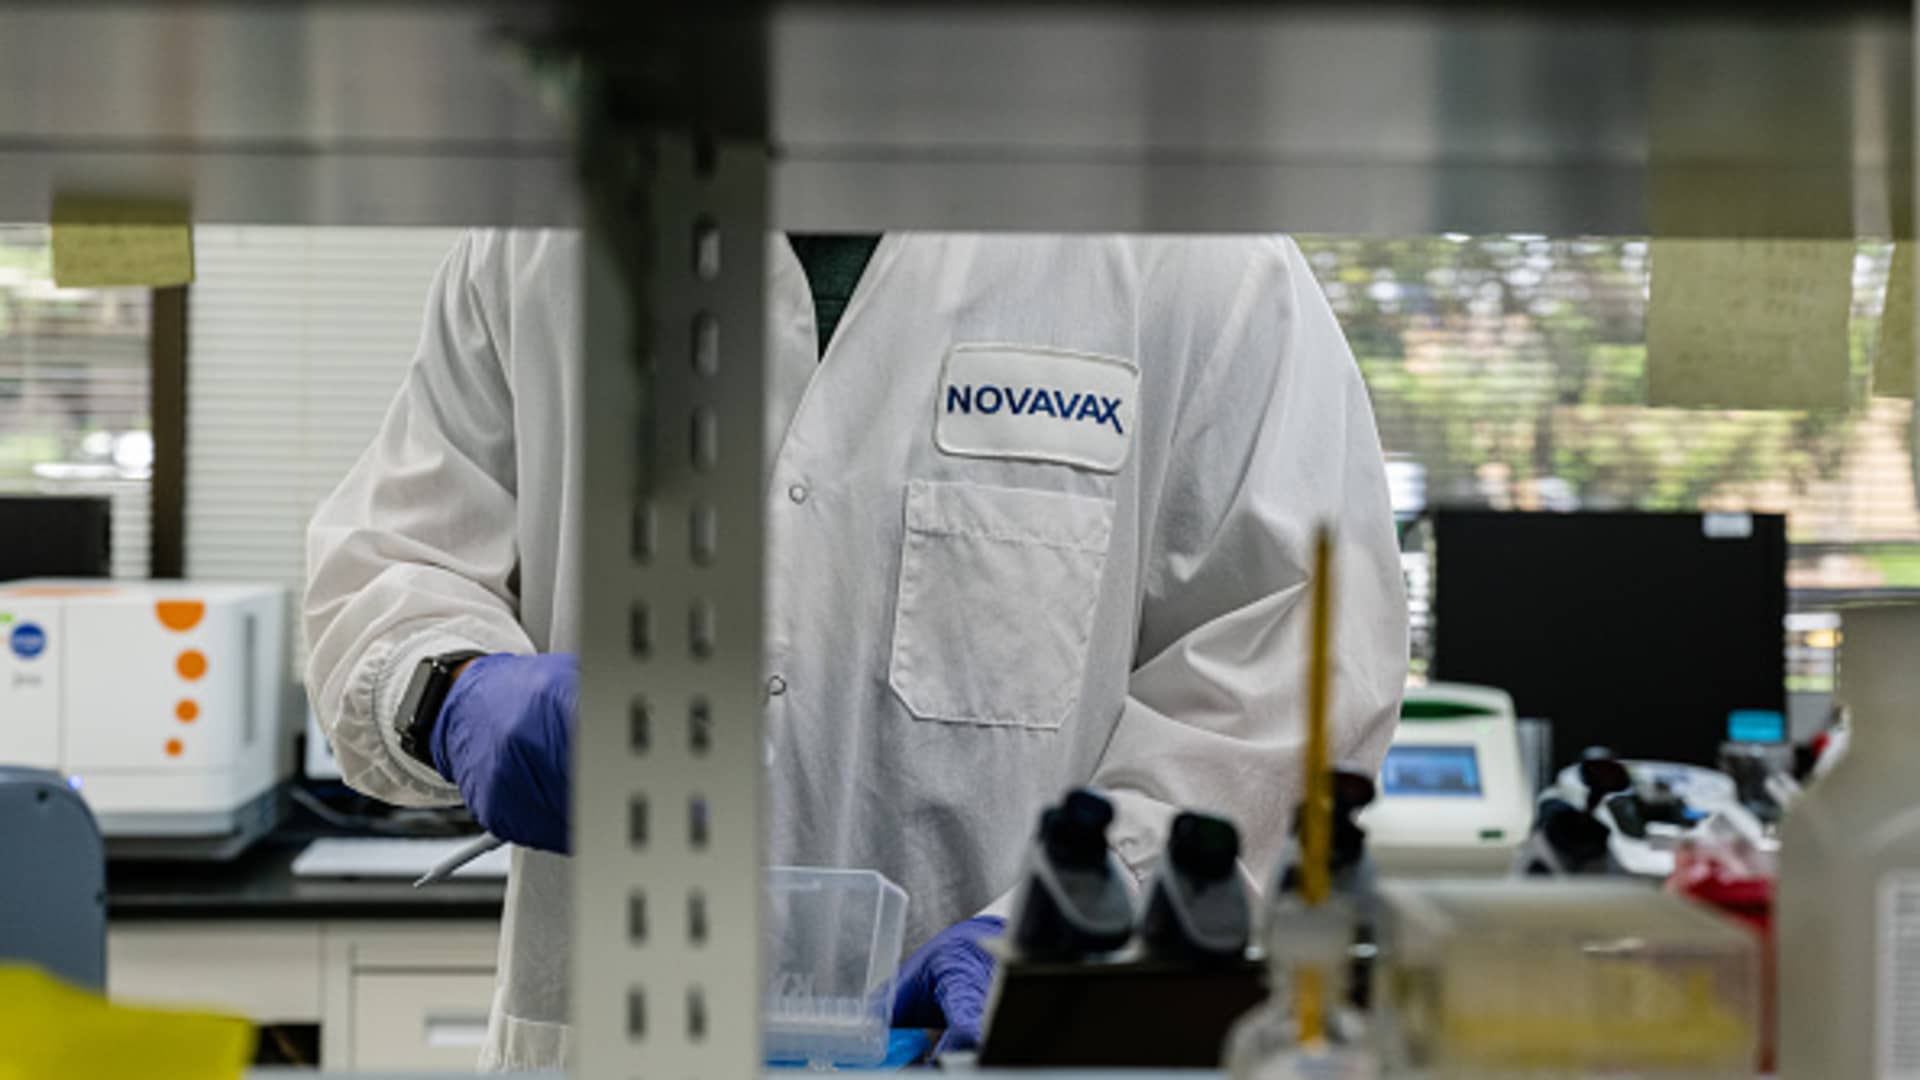 Novavax stock jumps after Canada agrees to pay for unused Covid shots